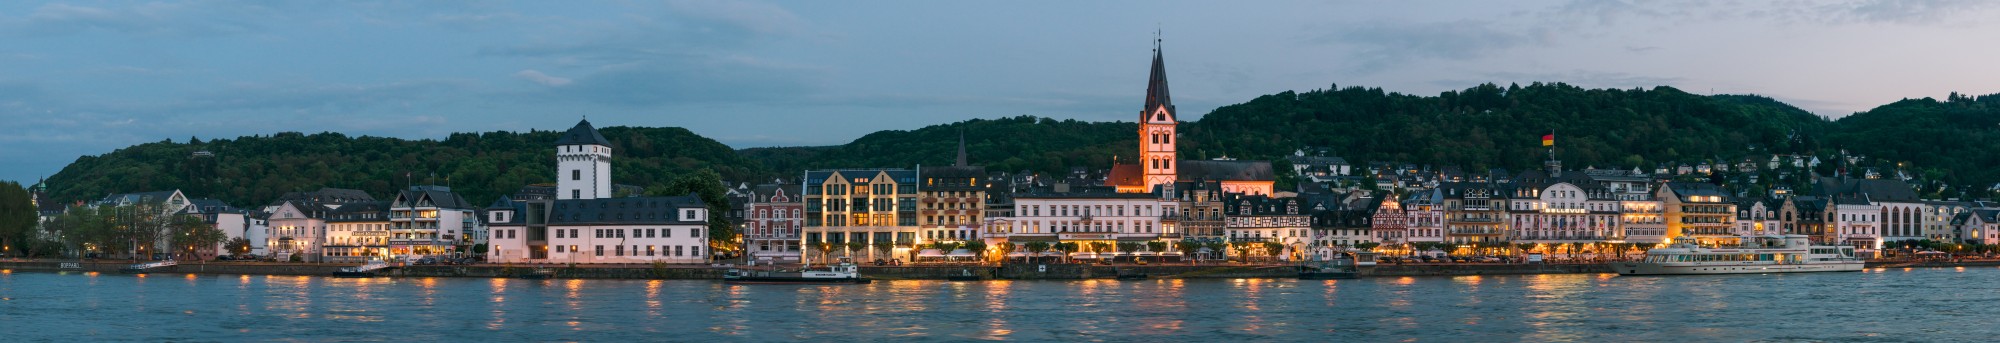 Panoramic view of Boppard at dusk 20150513 1